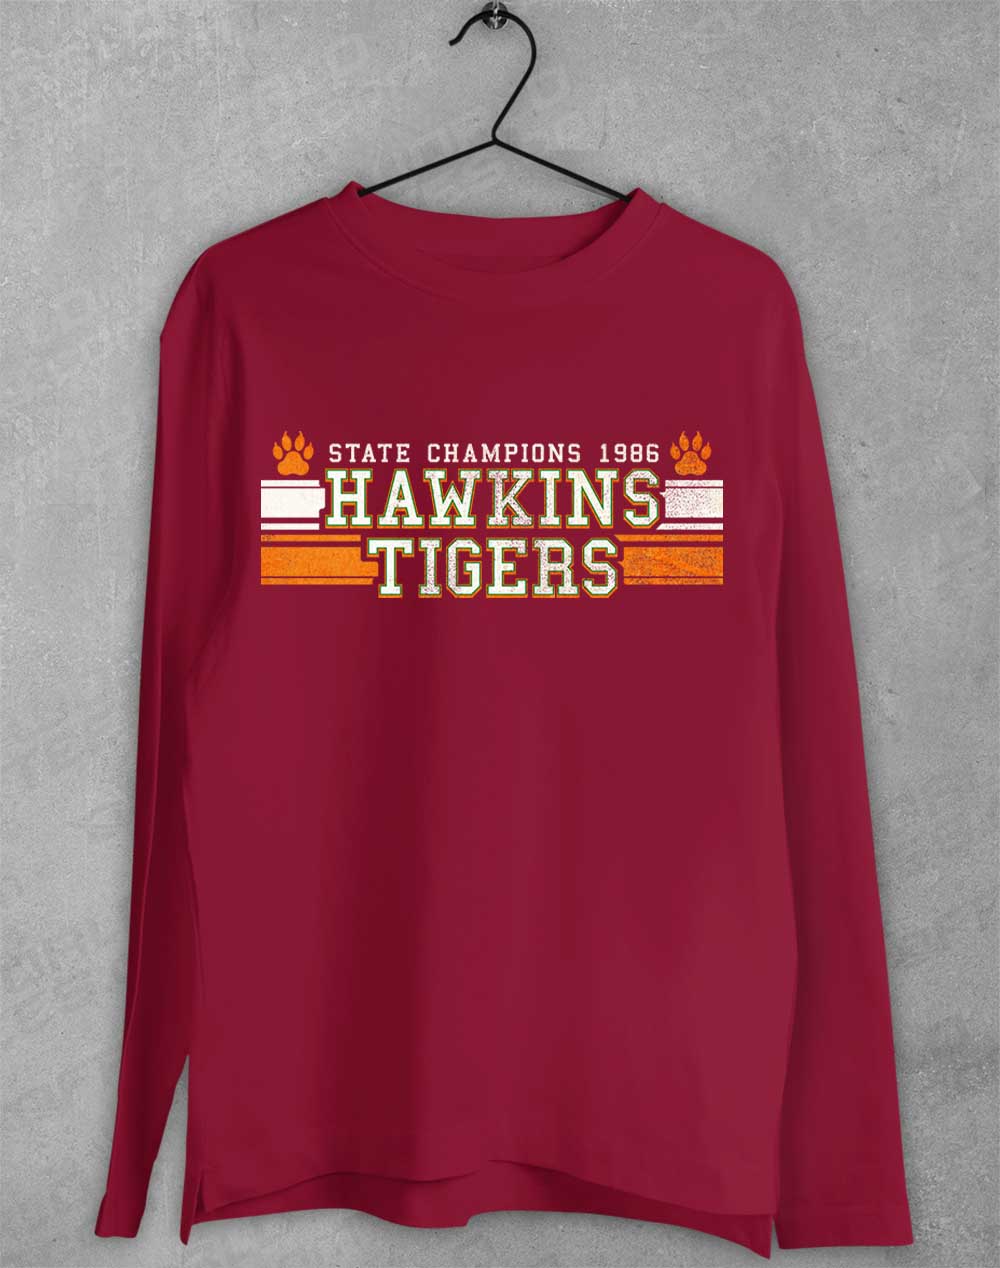 Cardinal Red - Hawkins Tigers State Champs 1986 Long Sleeve T-Shirt